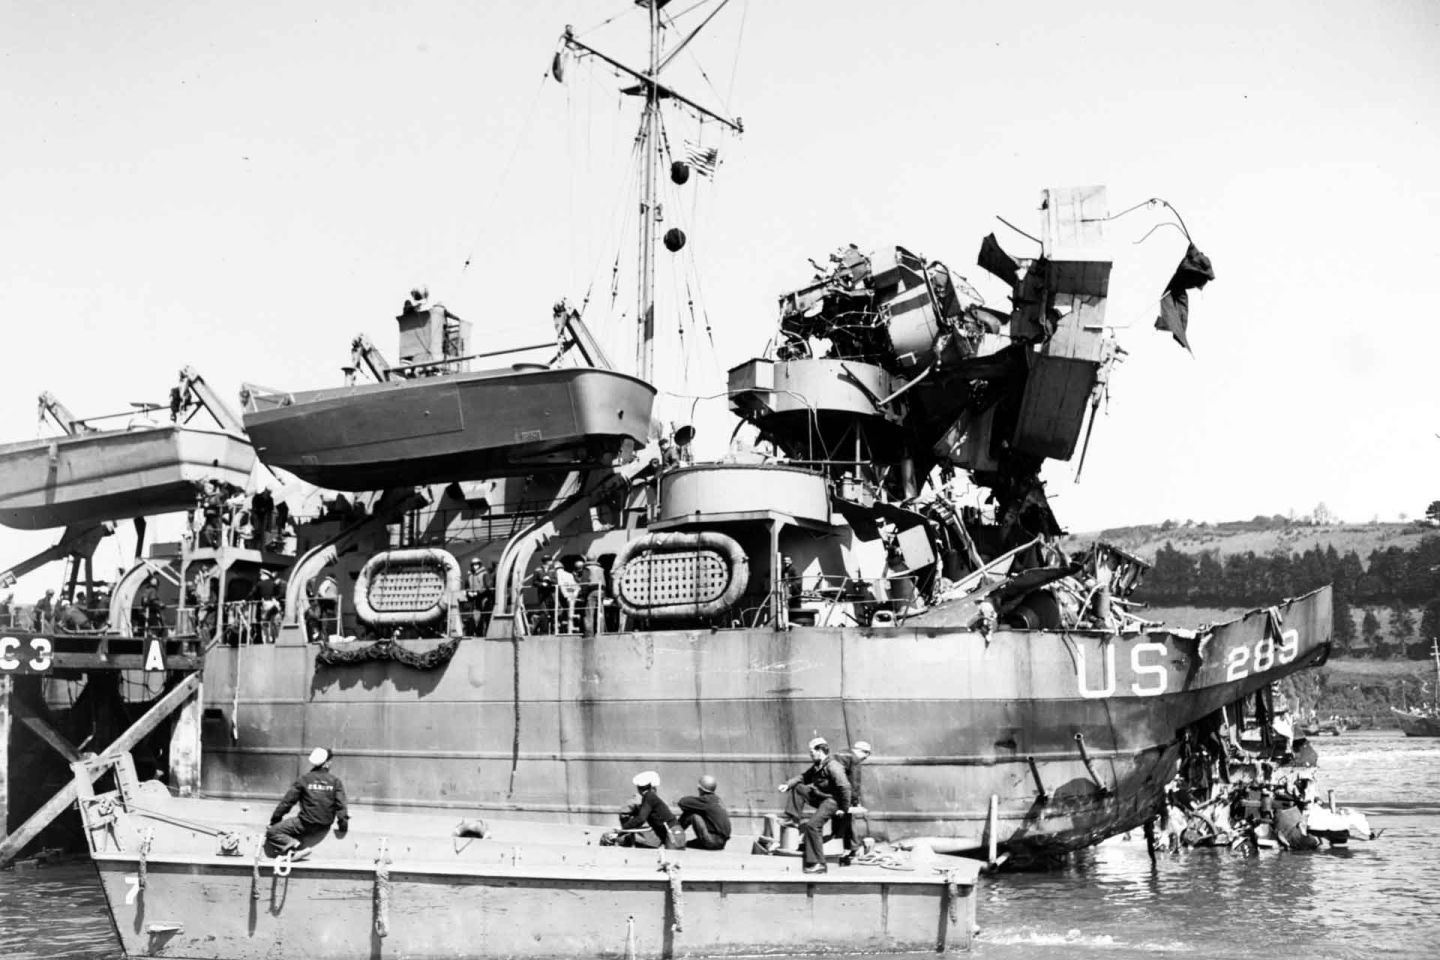 USS LST289
Docks at Dartmouth, England, After being torpedoed by German MTB's during invasion rehearsal operations off Slapton Sands.